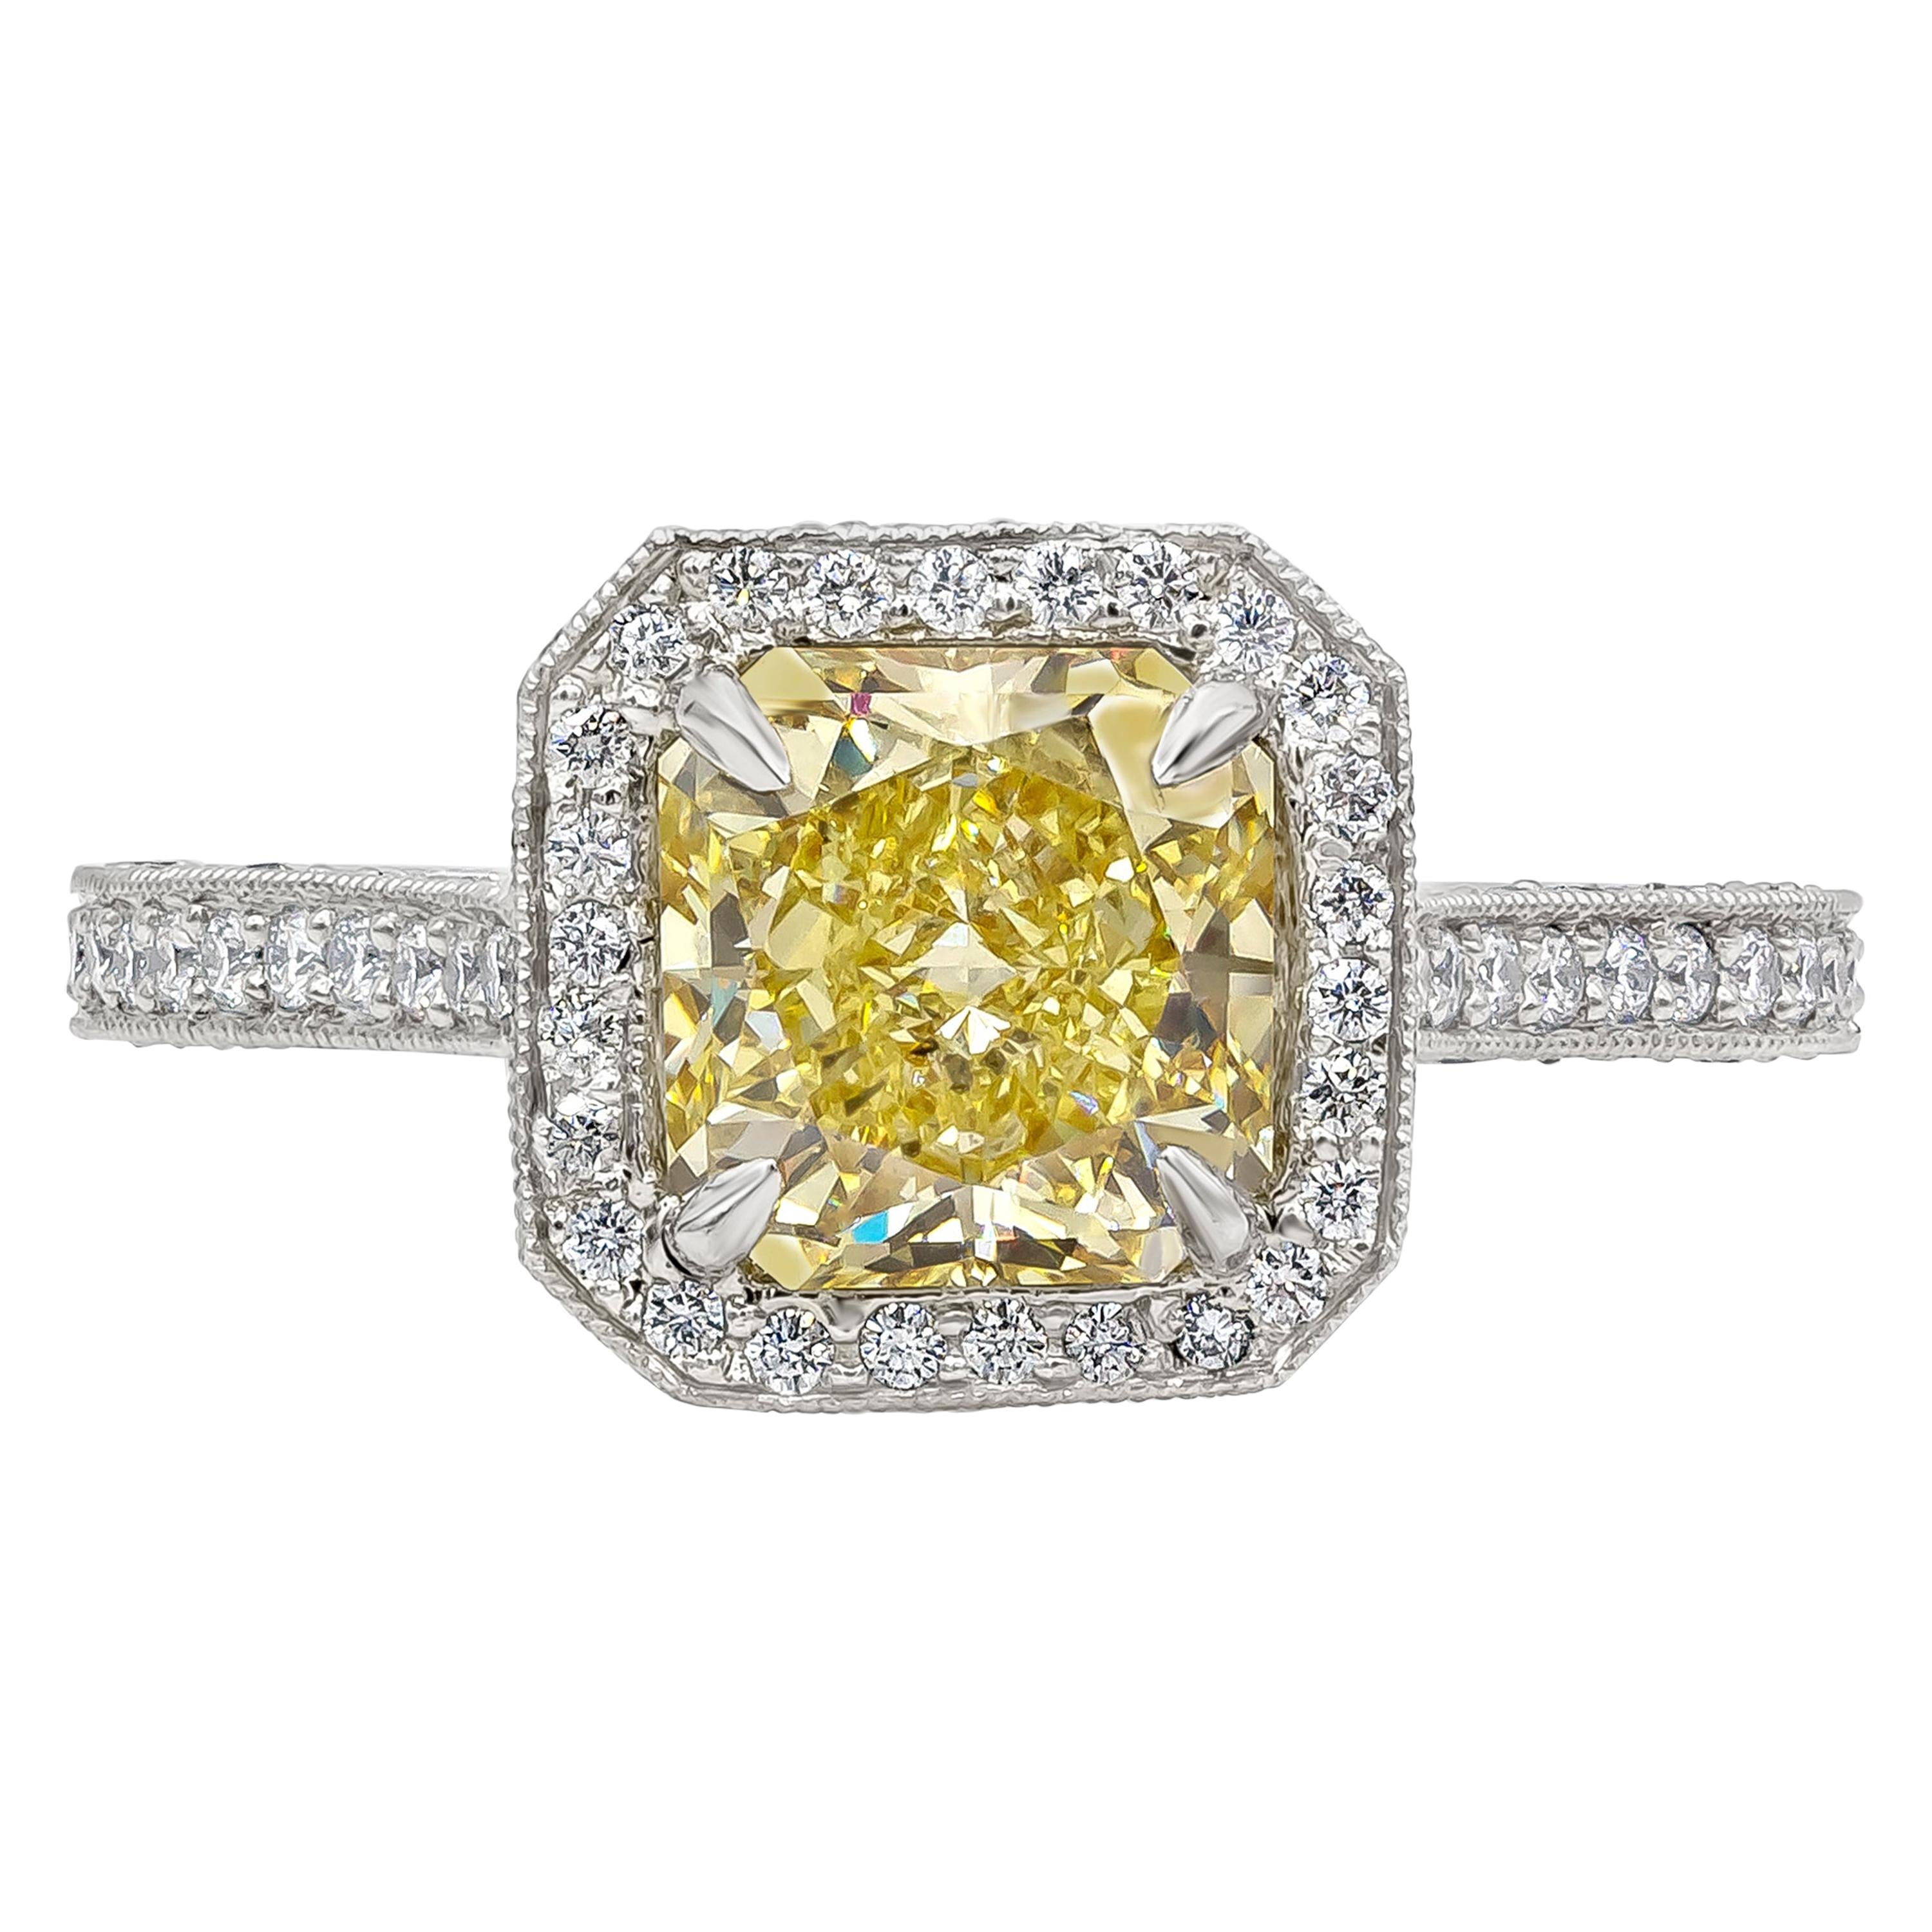 GIA Certified 1.76 Carats Yellow Diamond Vintage Style Halo Engagement Ring